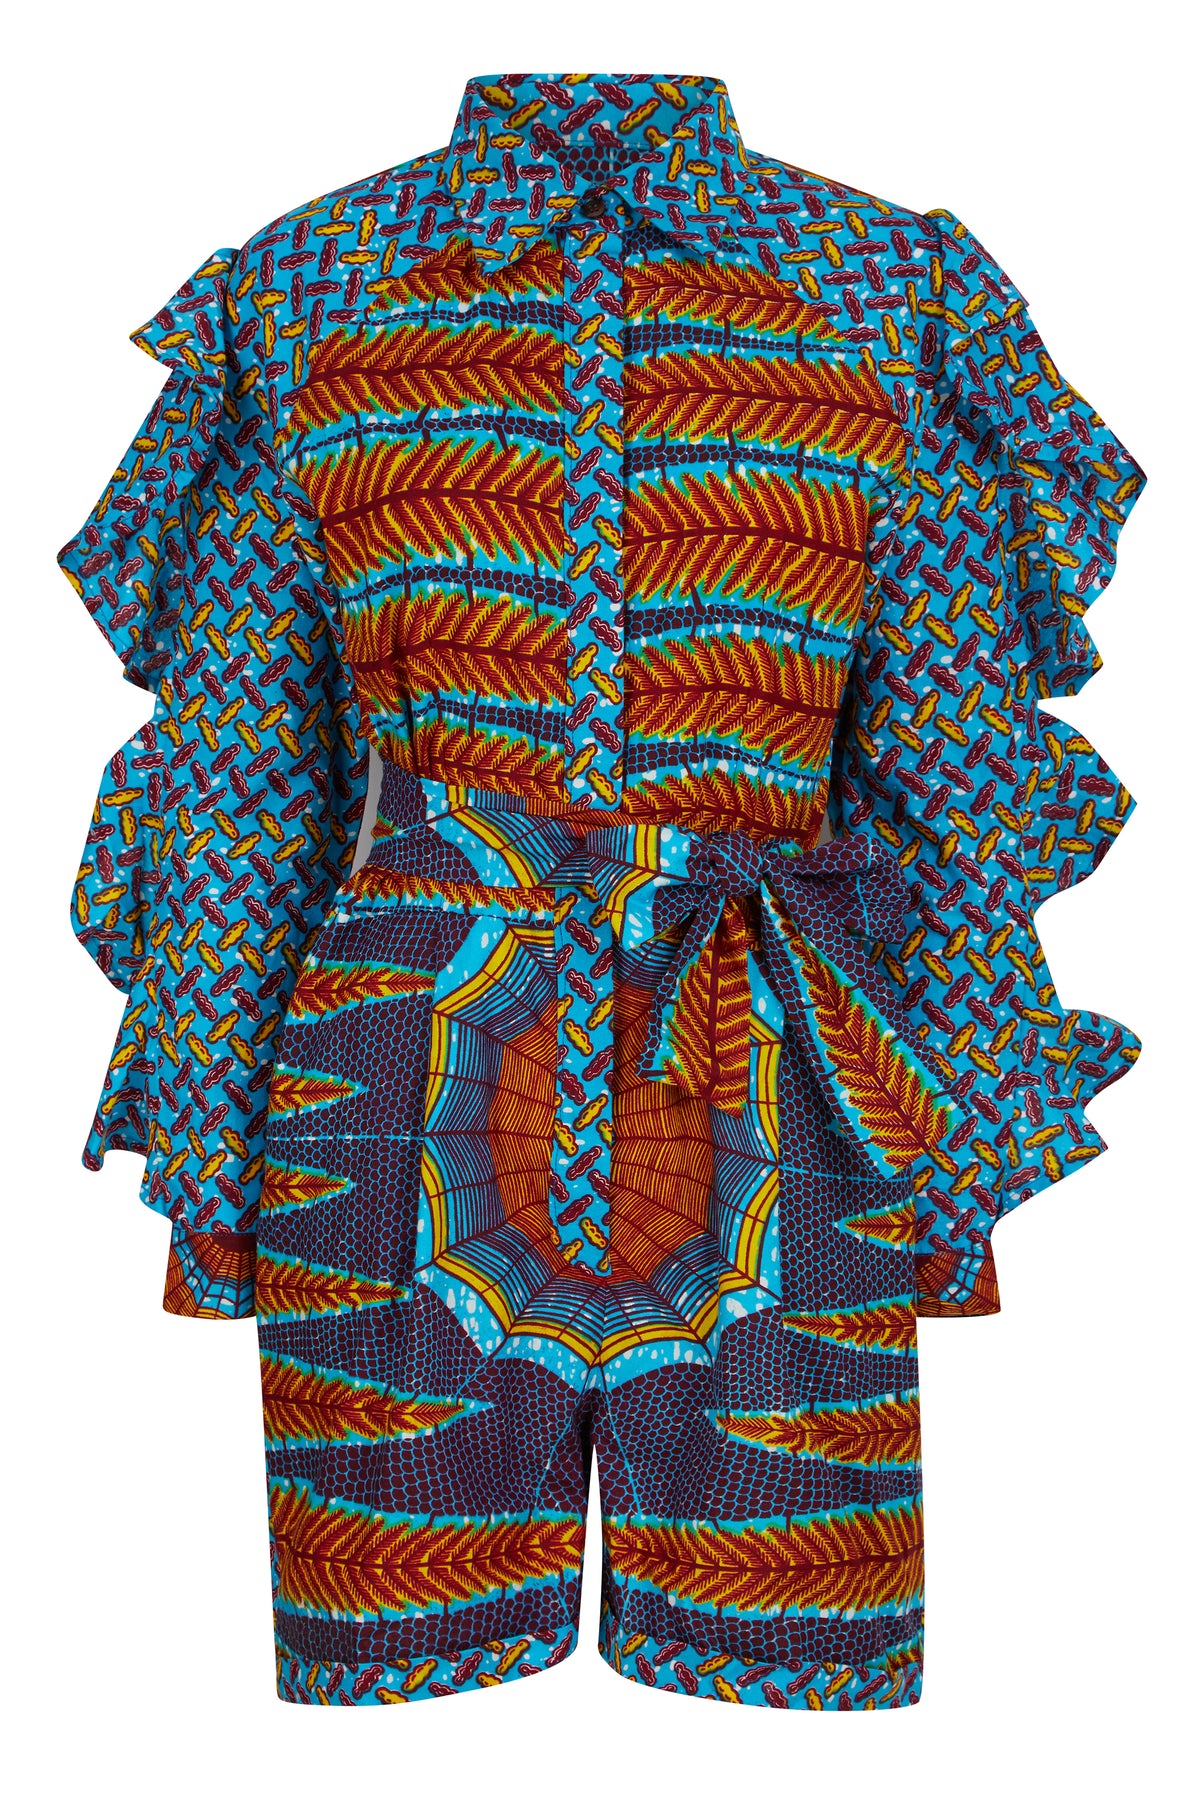 Linda African Mixed Print Playsuit - OHEMA OHENE AFRICAN INSPIRED FASHION